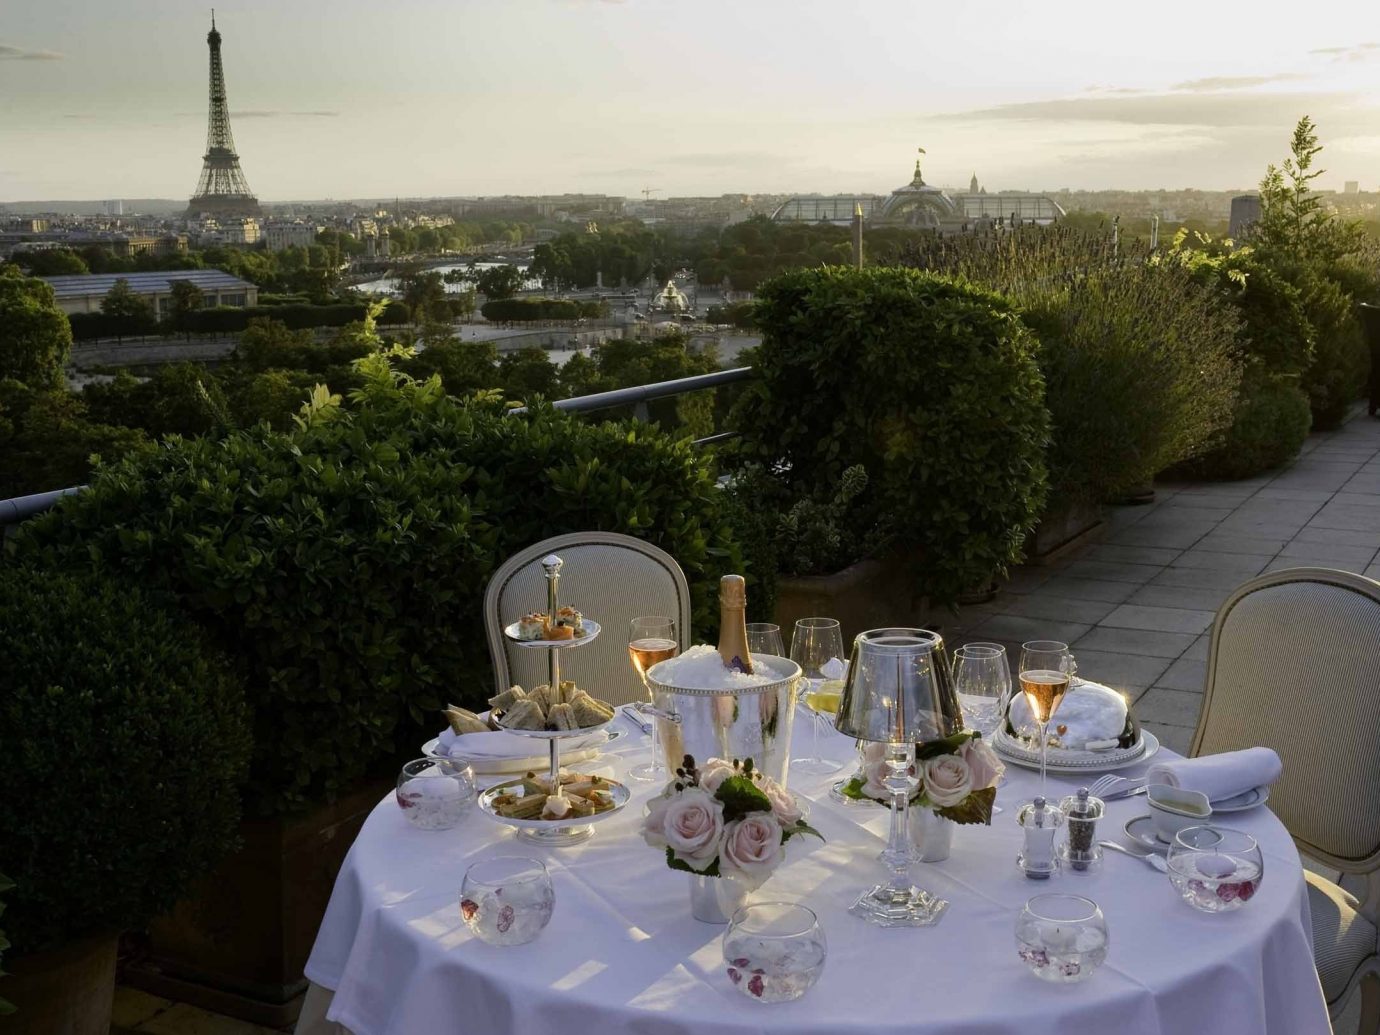 France Hotels Luxury Travel Paris tree outdoor meal flower dining table